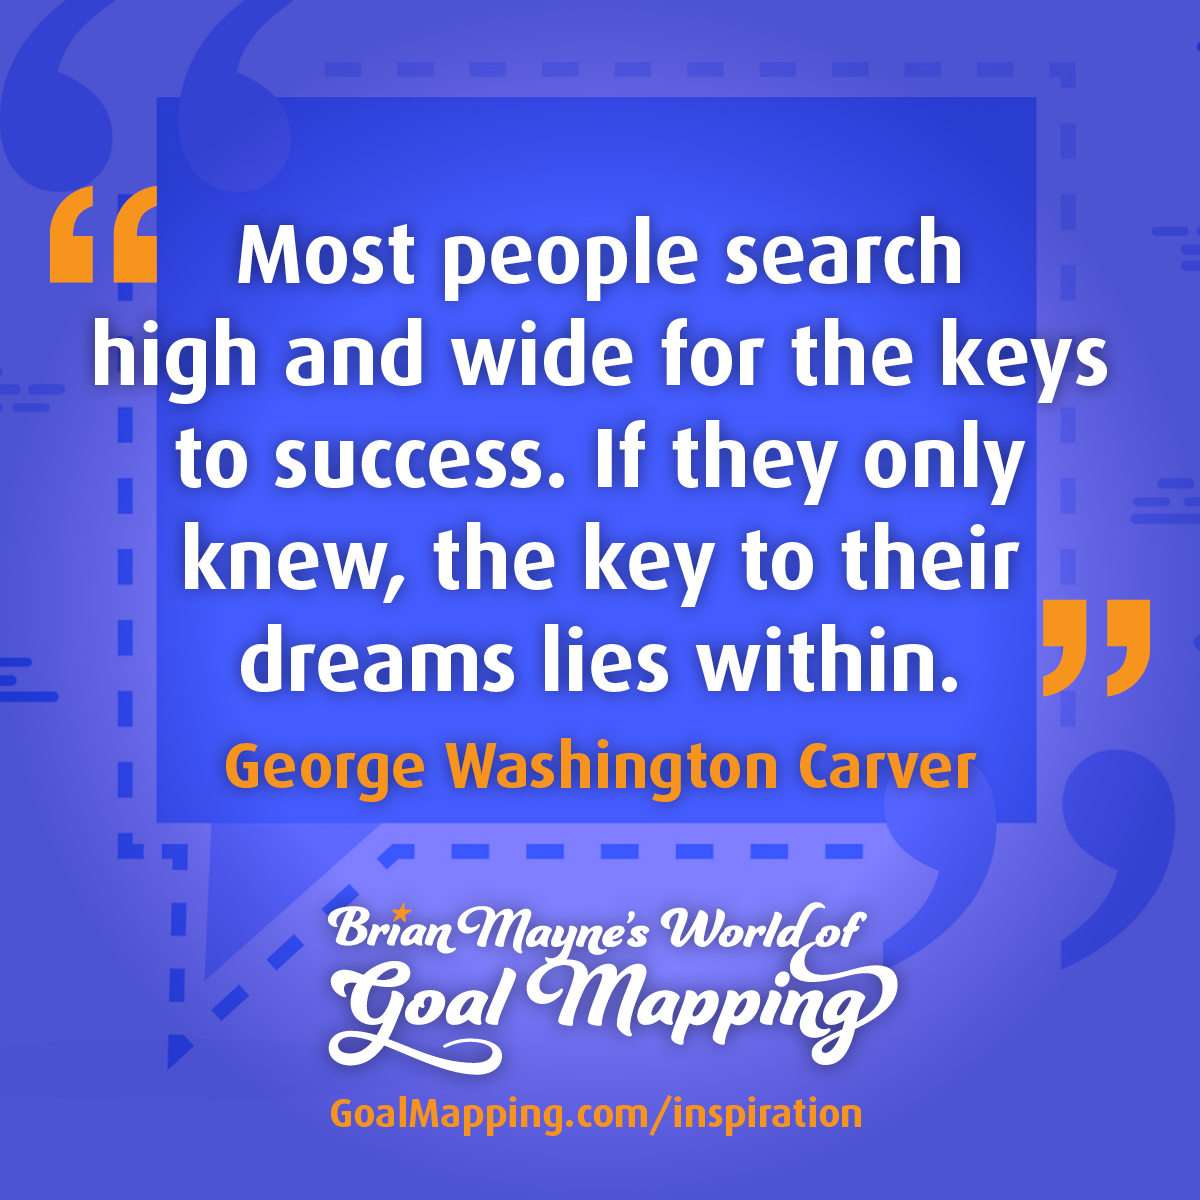 "Most people search high and wide for the keys to success. If they only knew, the key to their dreams lies within." George Washington Carver